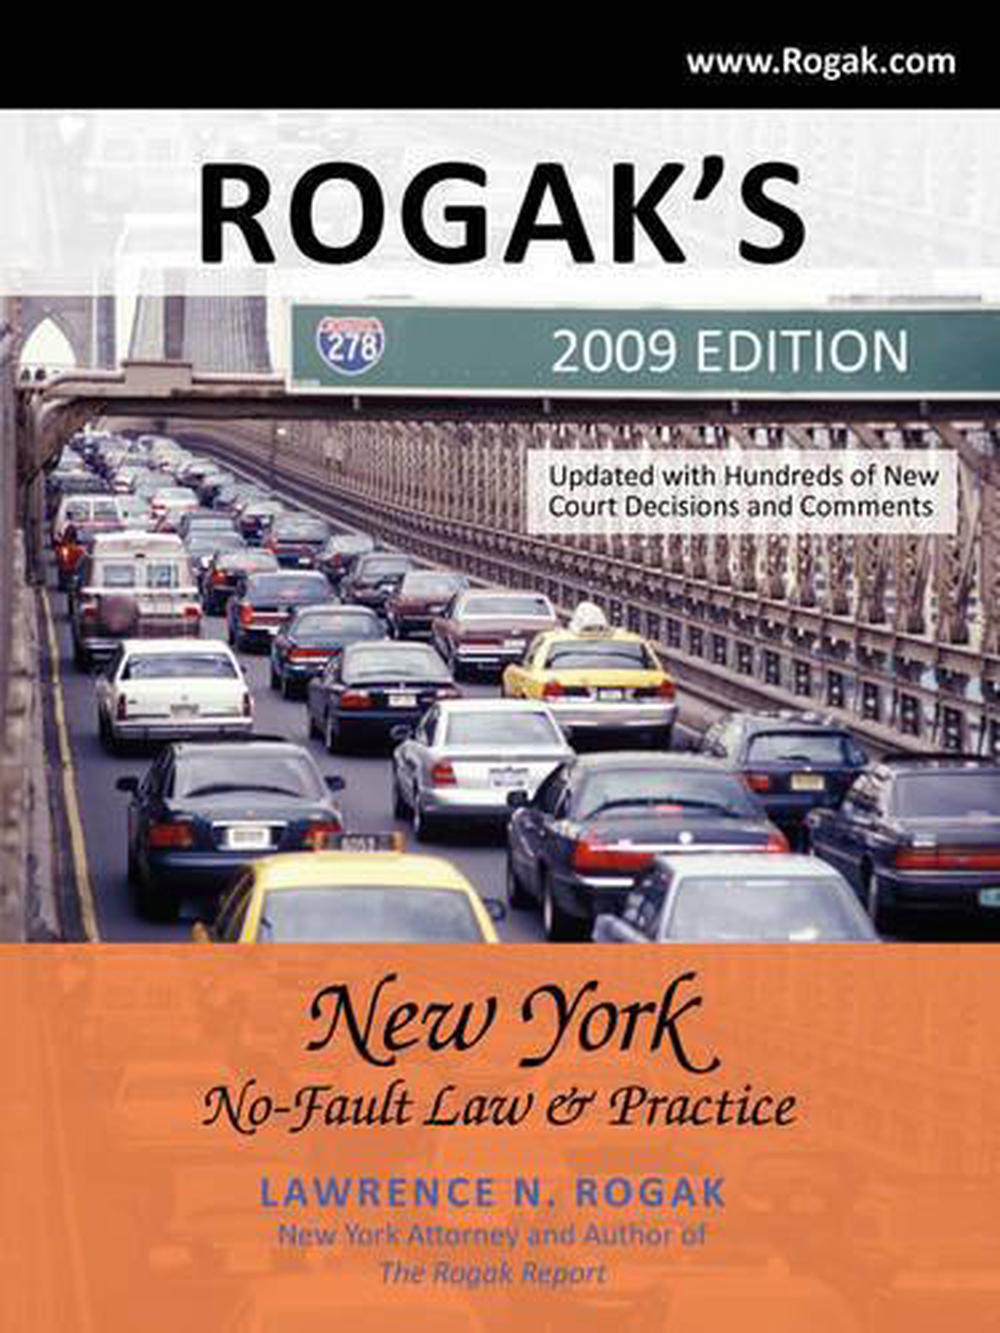 Rogak's New York NoFault Law & Practice 2009 Edition by Lawrence N. Rogak (Eng 9781440111792